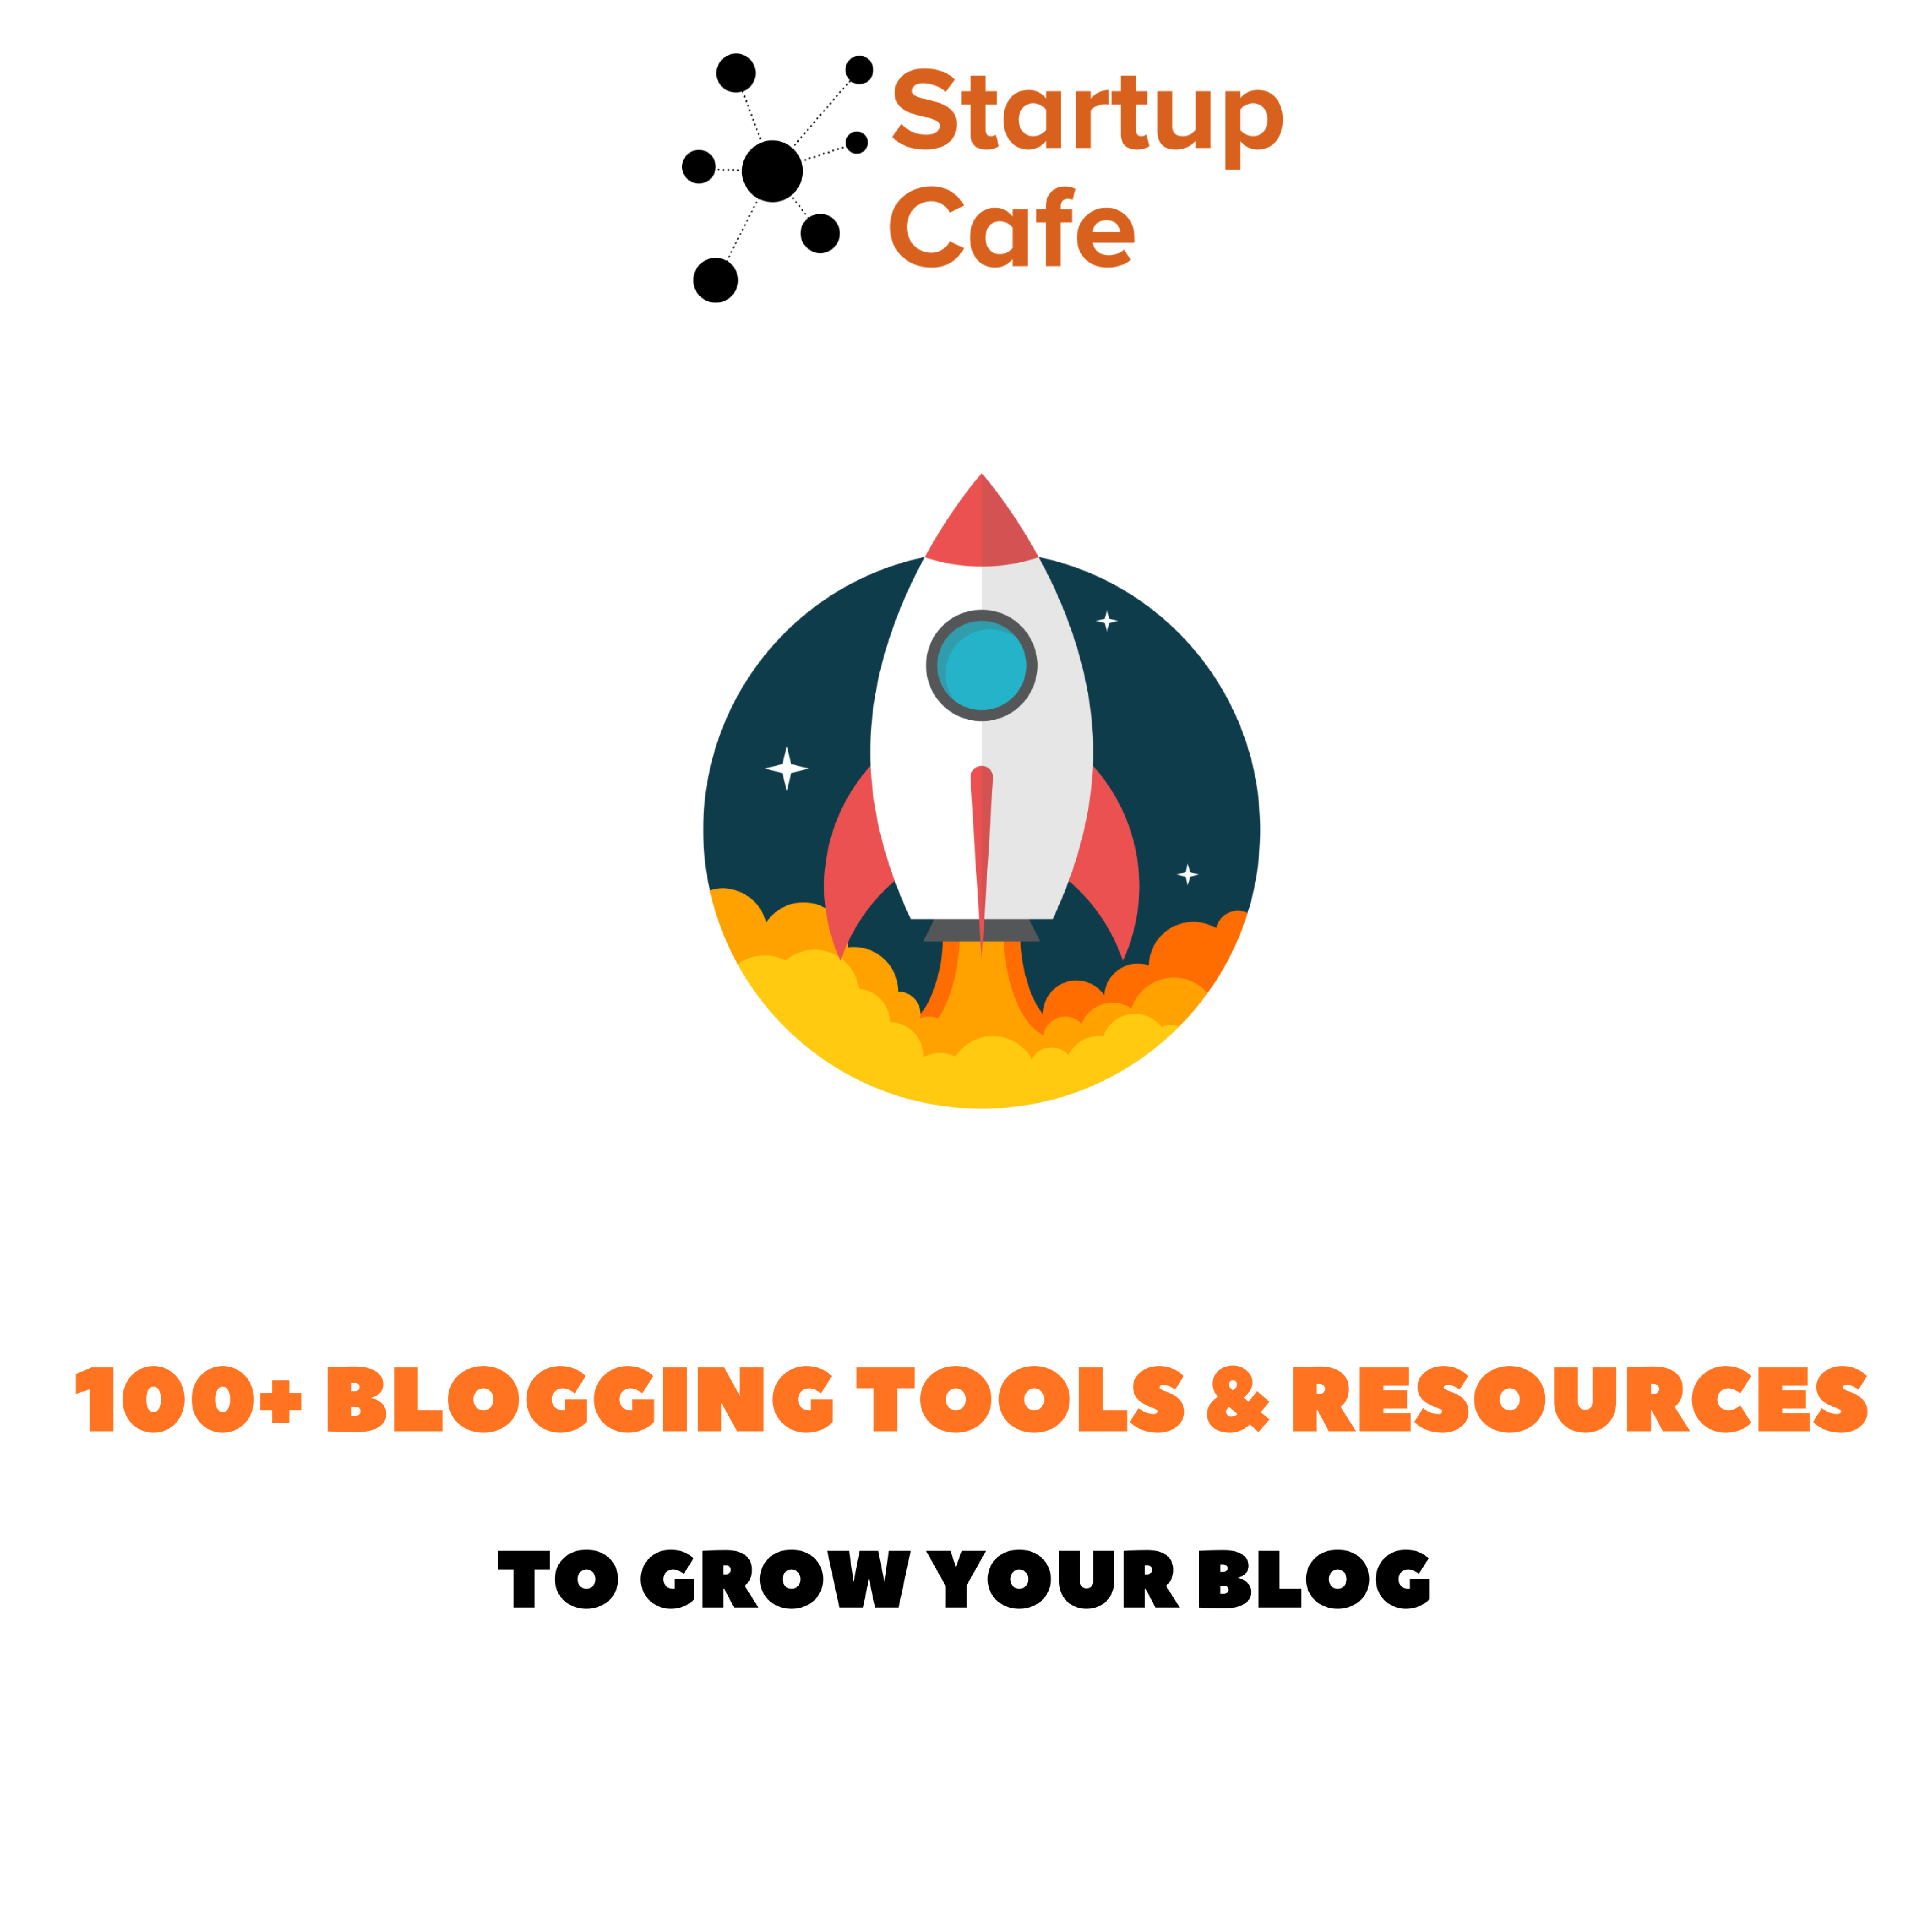 Blogging Tools to Grow Your Blog